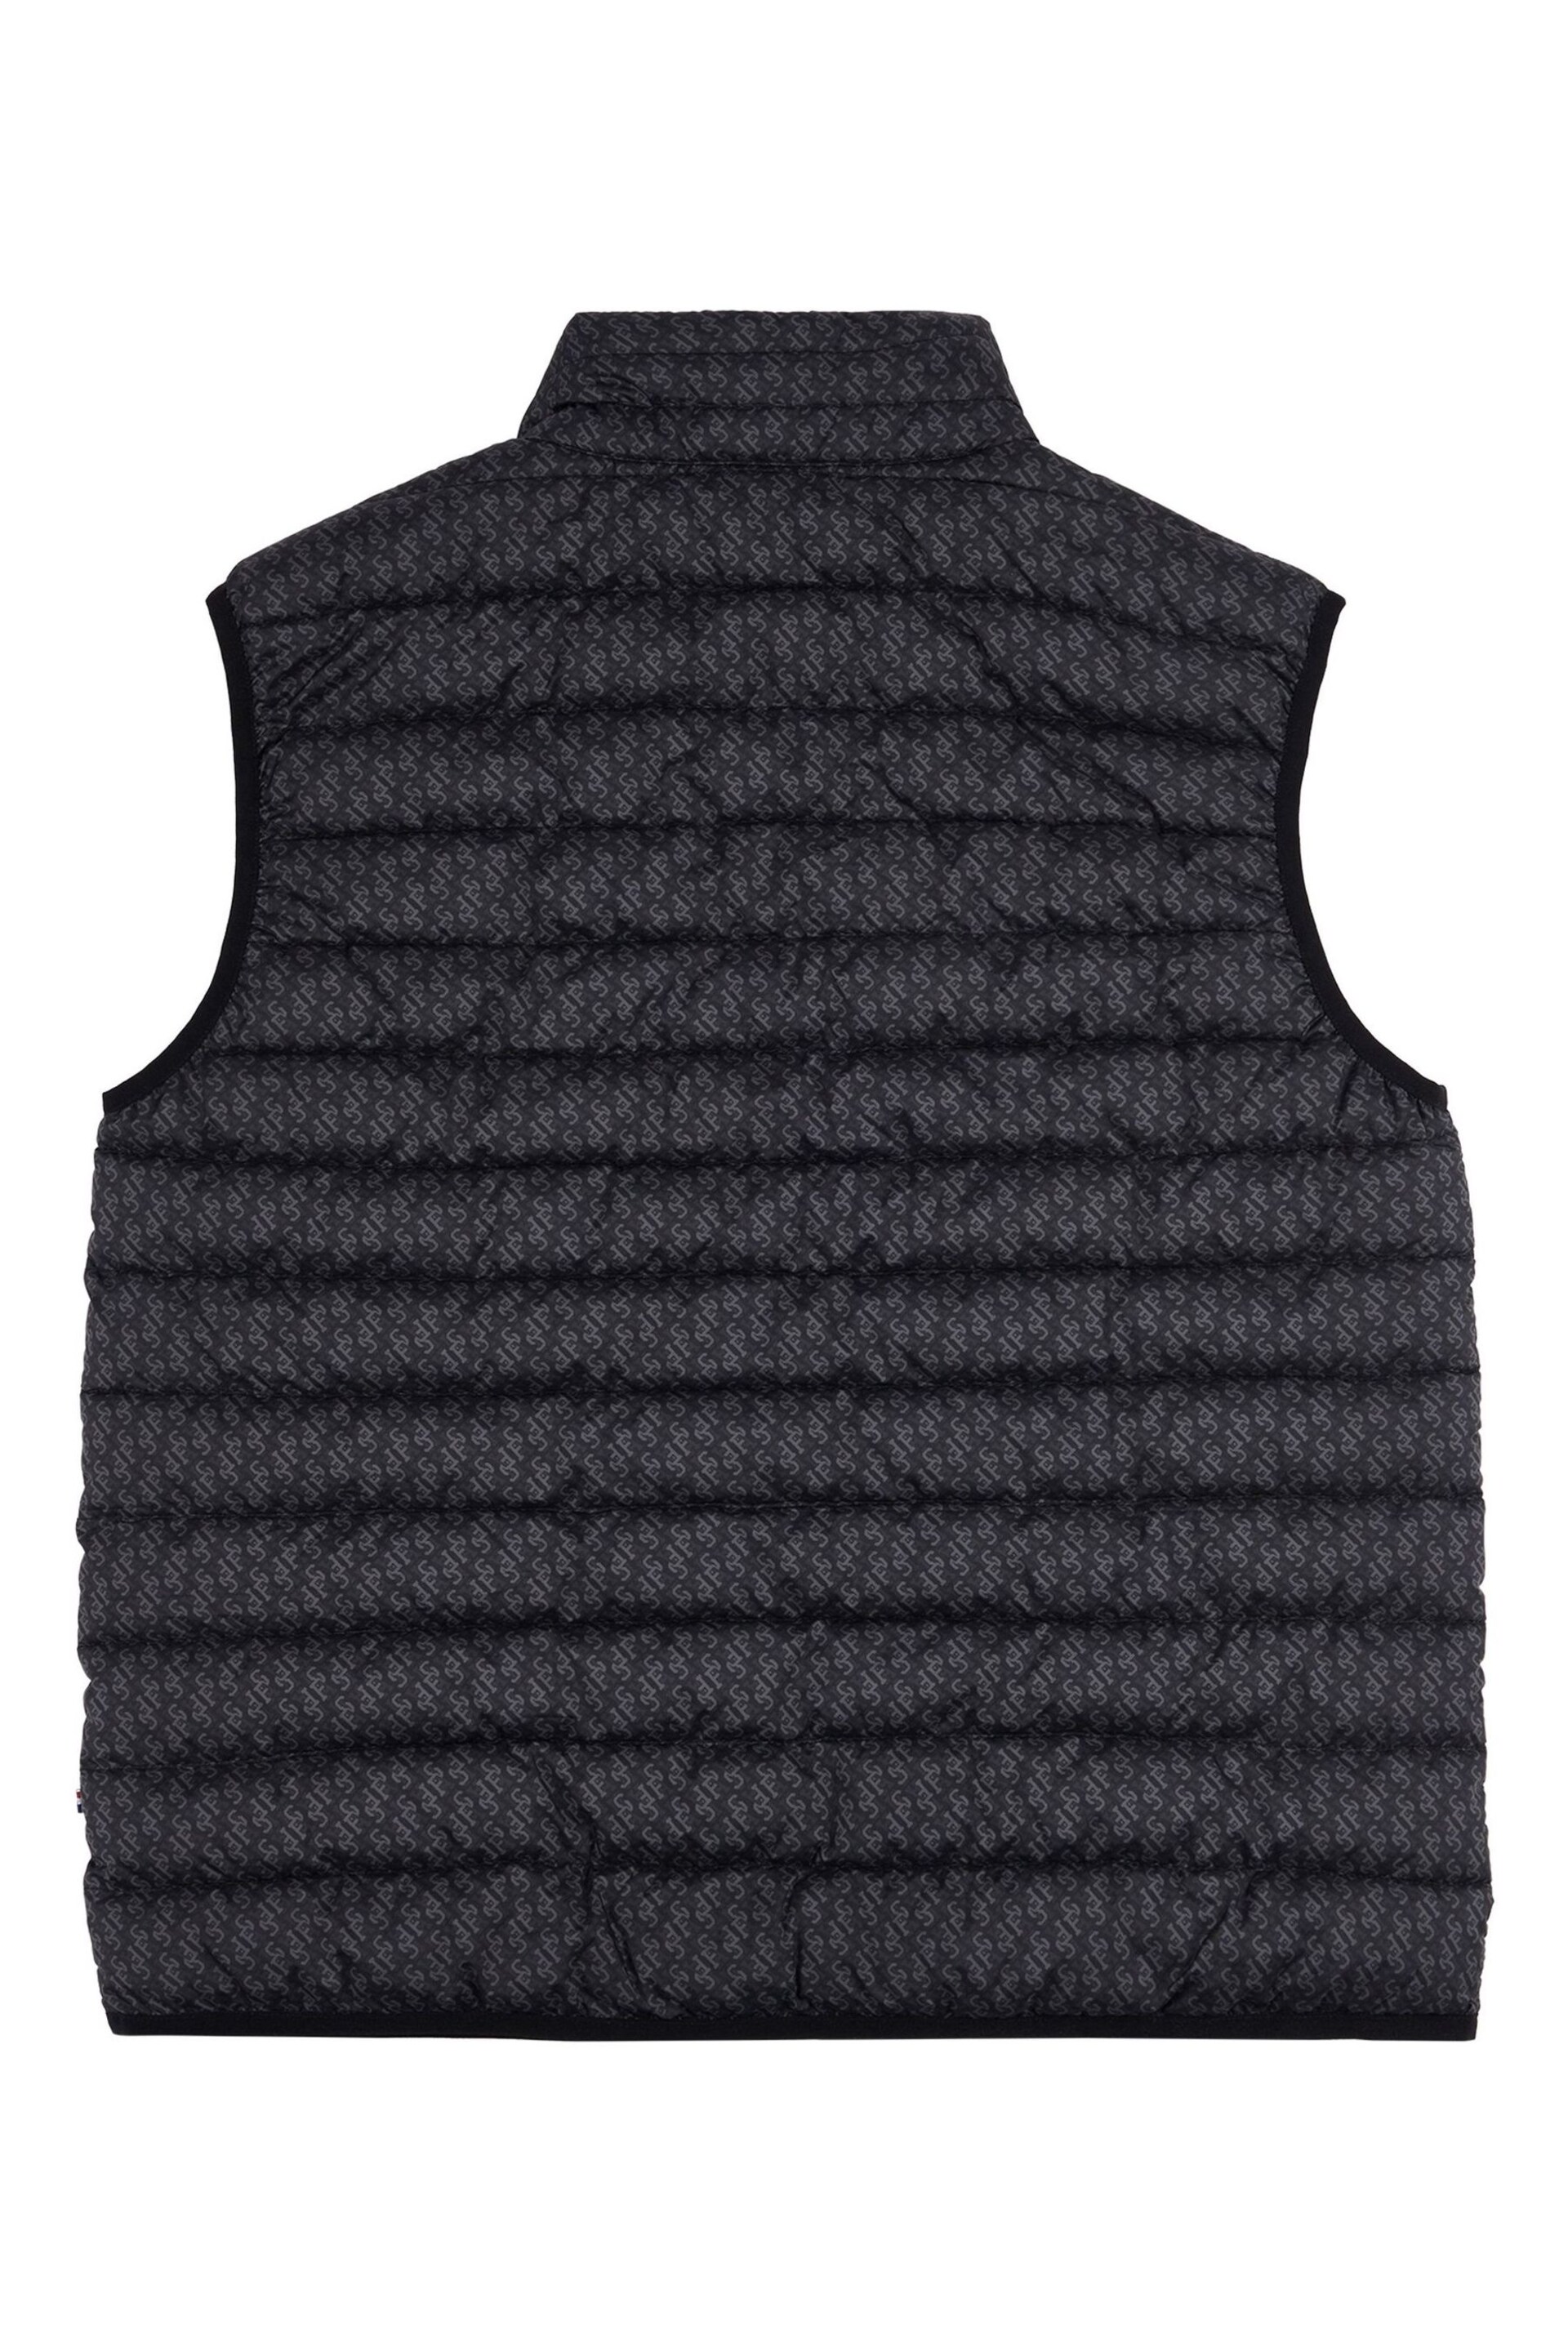 U.S. Polo Assn. Mens Monogram Quilted Black Gilet - Image 6 of 7